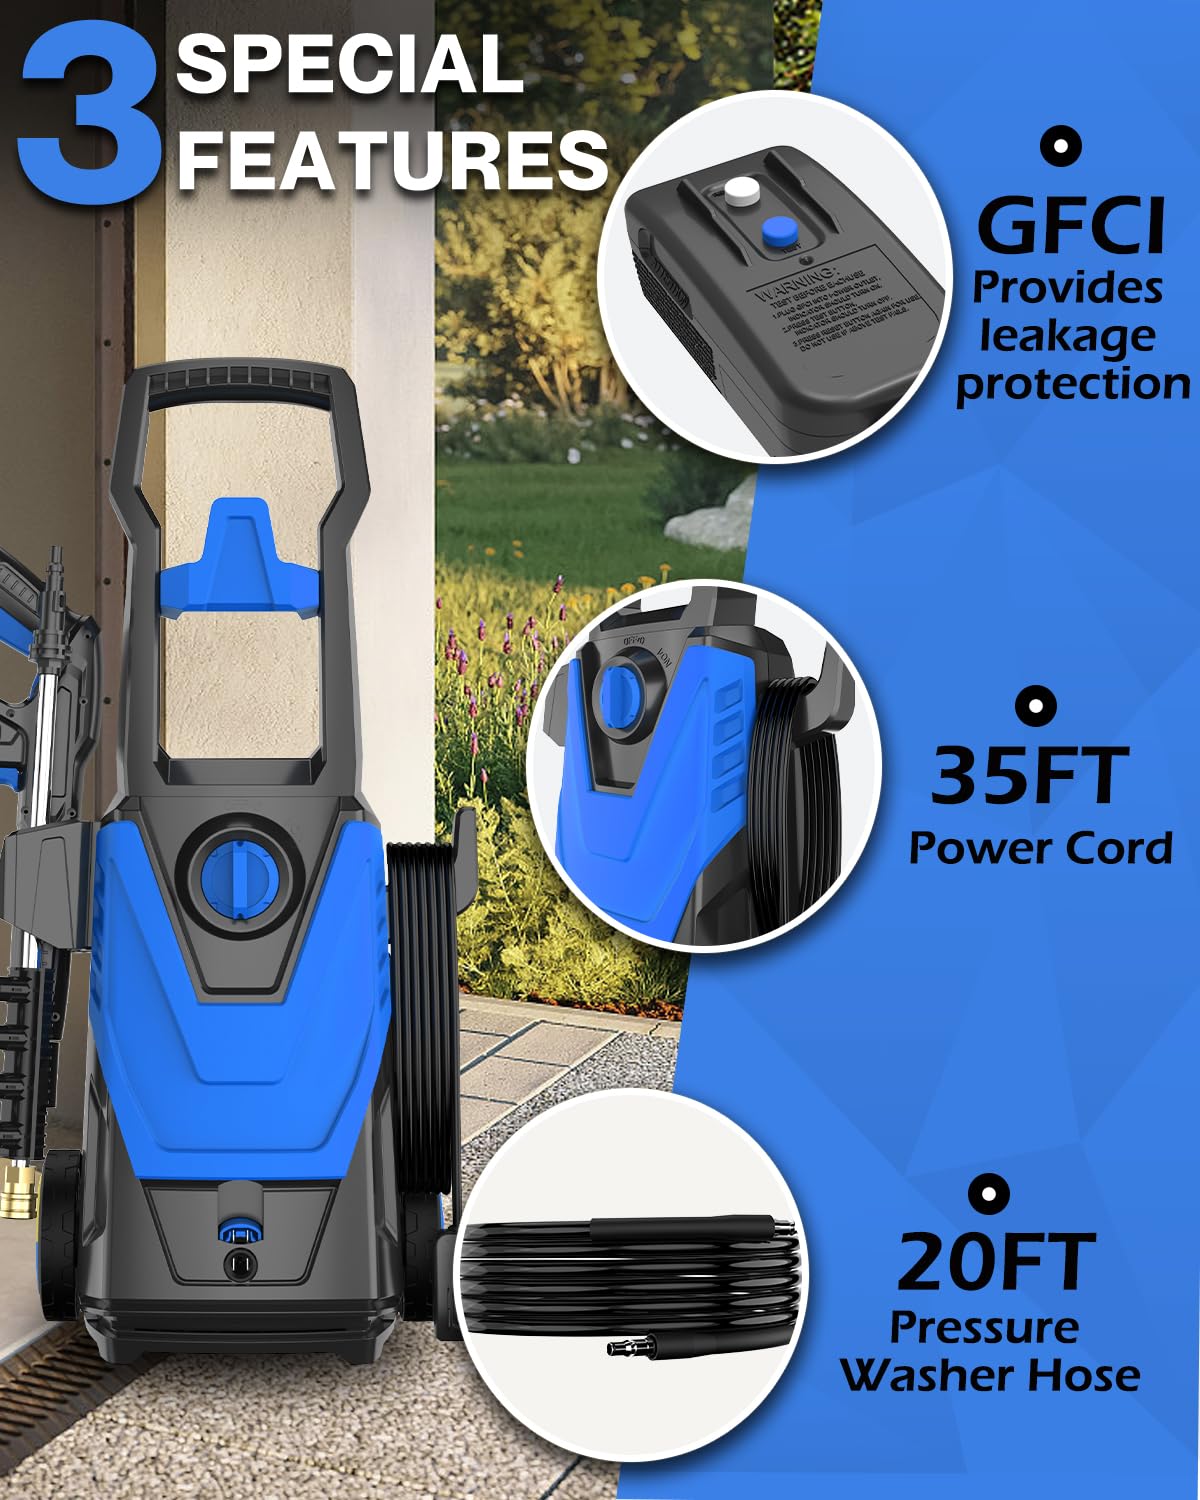 AgiiMan Electric Pressure Washer, 4200PSI Max 2.8 GPM Power Washer Electric Powered with 20FT Hose, 4 Nozzles, Foam Cannon, High Pressure Cleaner Machine for Cars,Patios,Furniture,Driveways, Blue